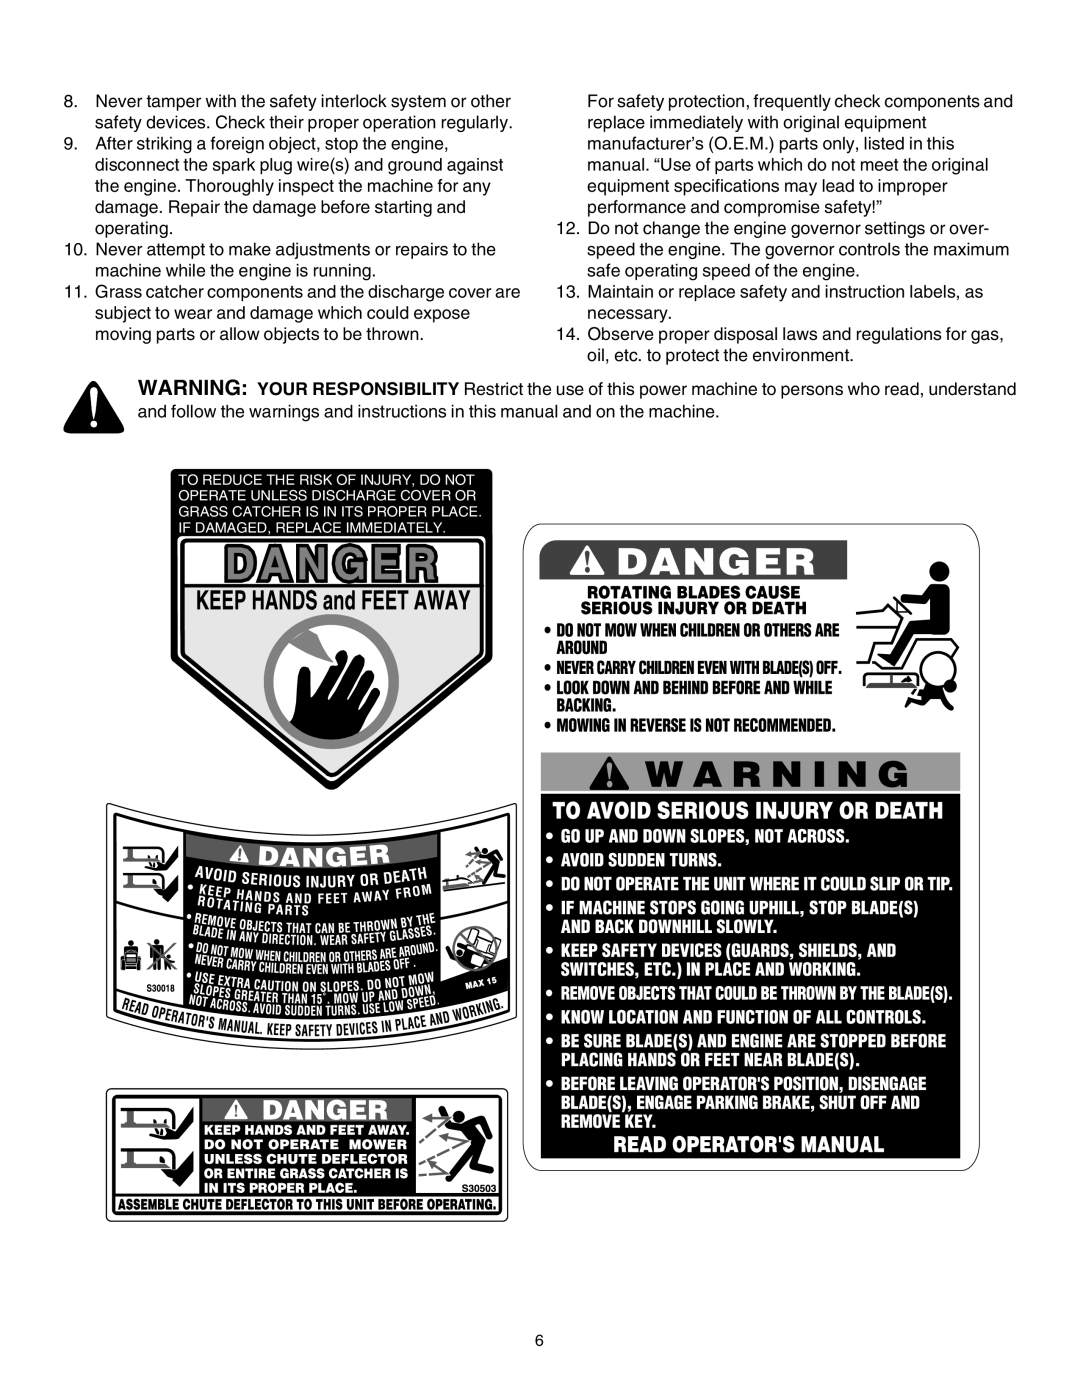 Cub Cadet LT1046, LT1042, LT1045, LT1050 manual Maintain or replace safety and instruction labels, as necessary 